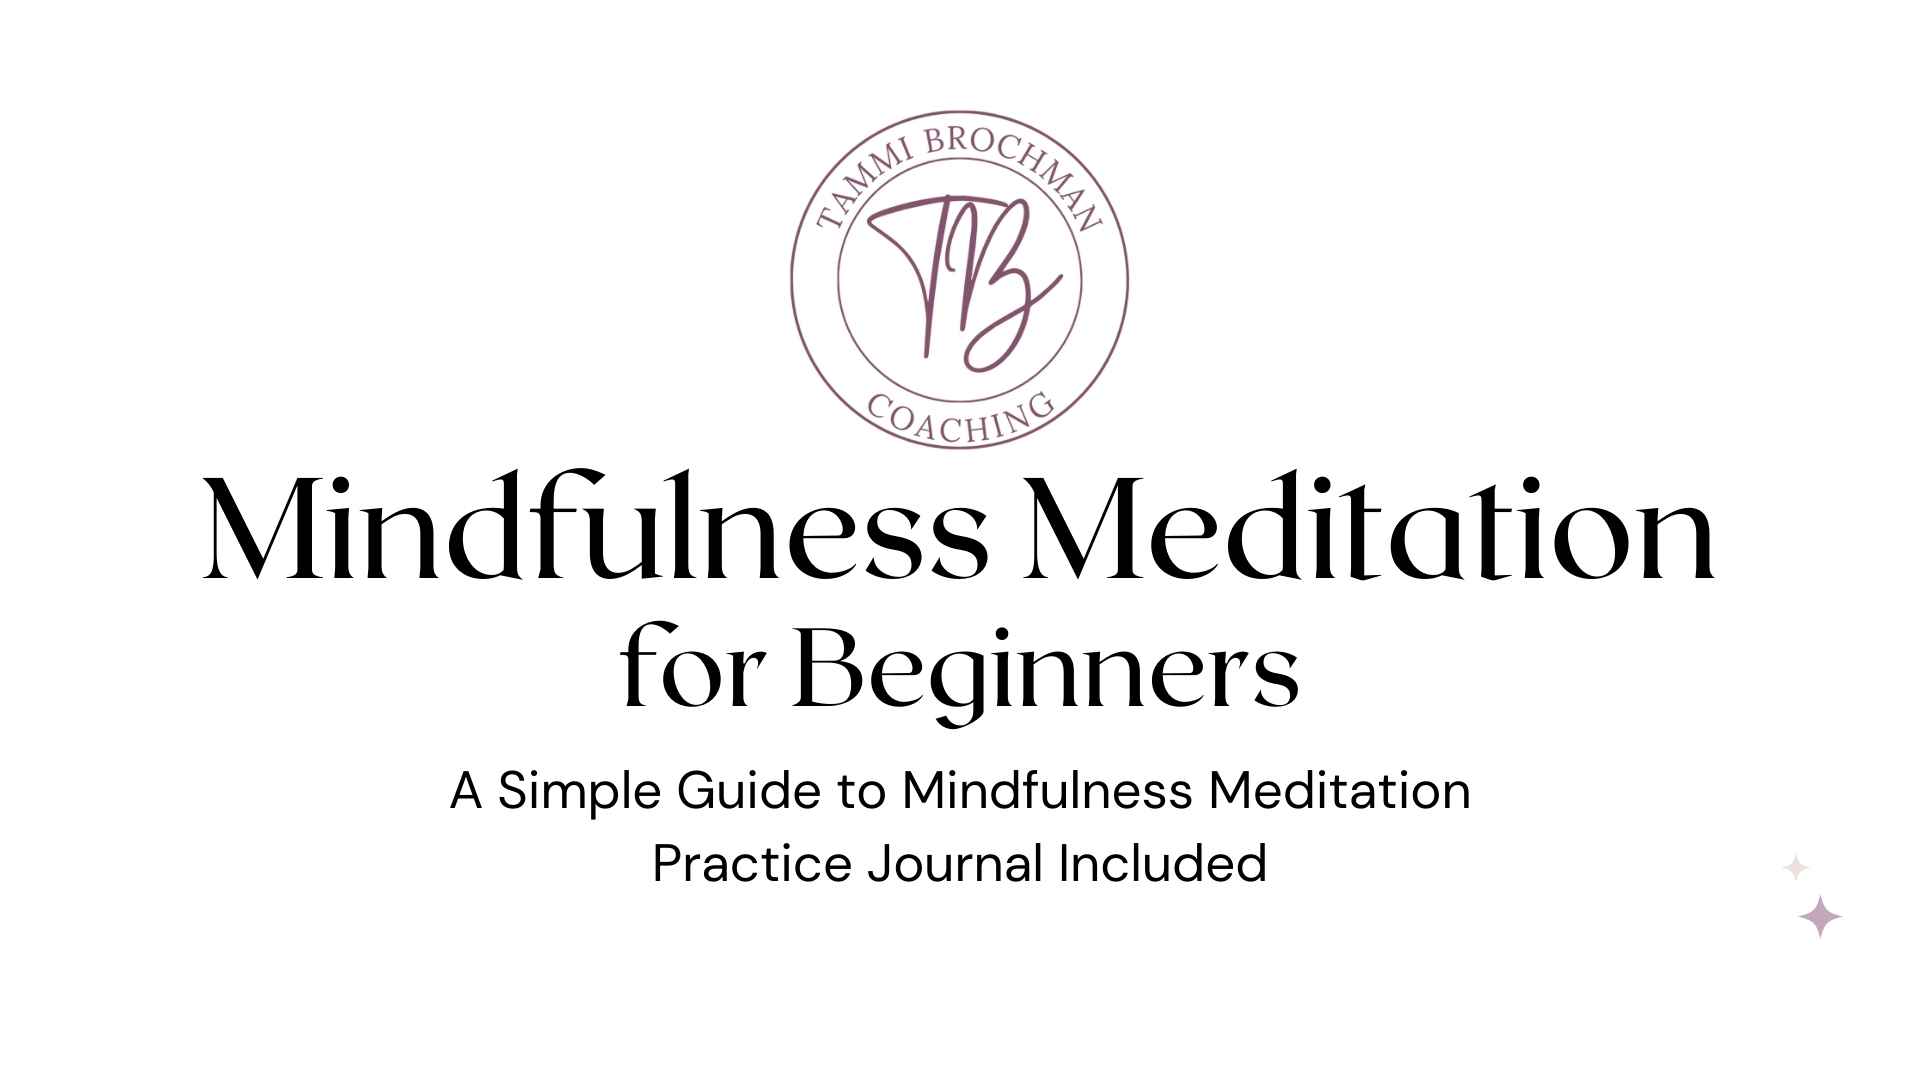 Mindfulness Meditation for Beginners FREE guide!